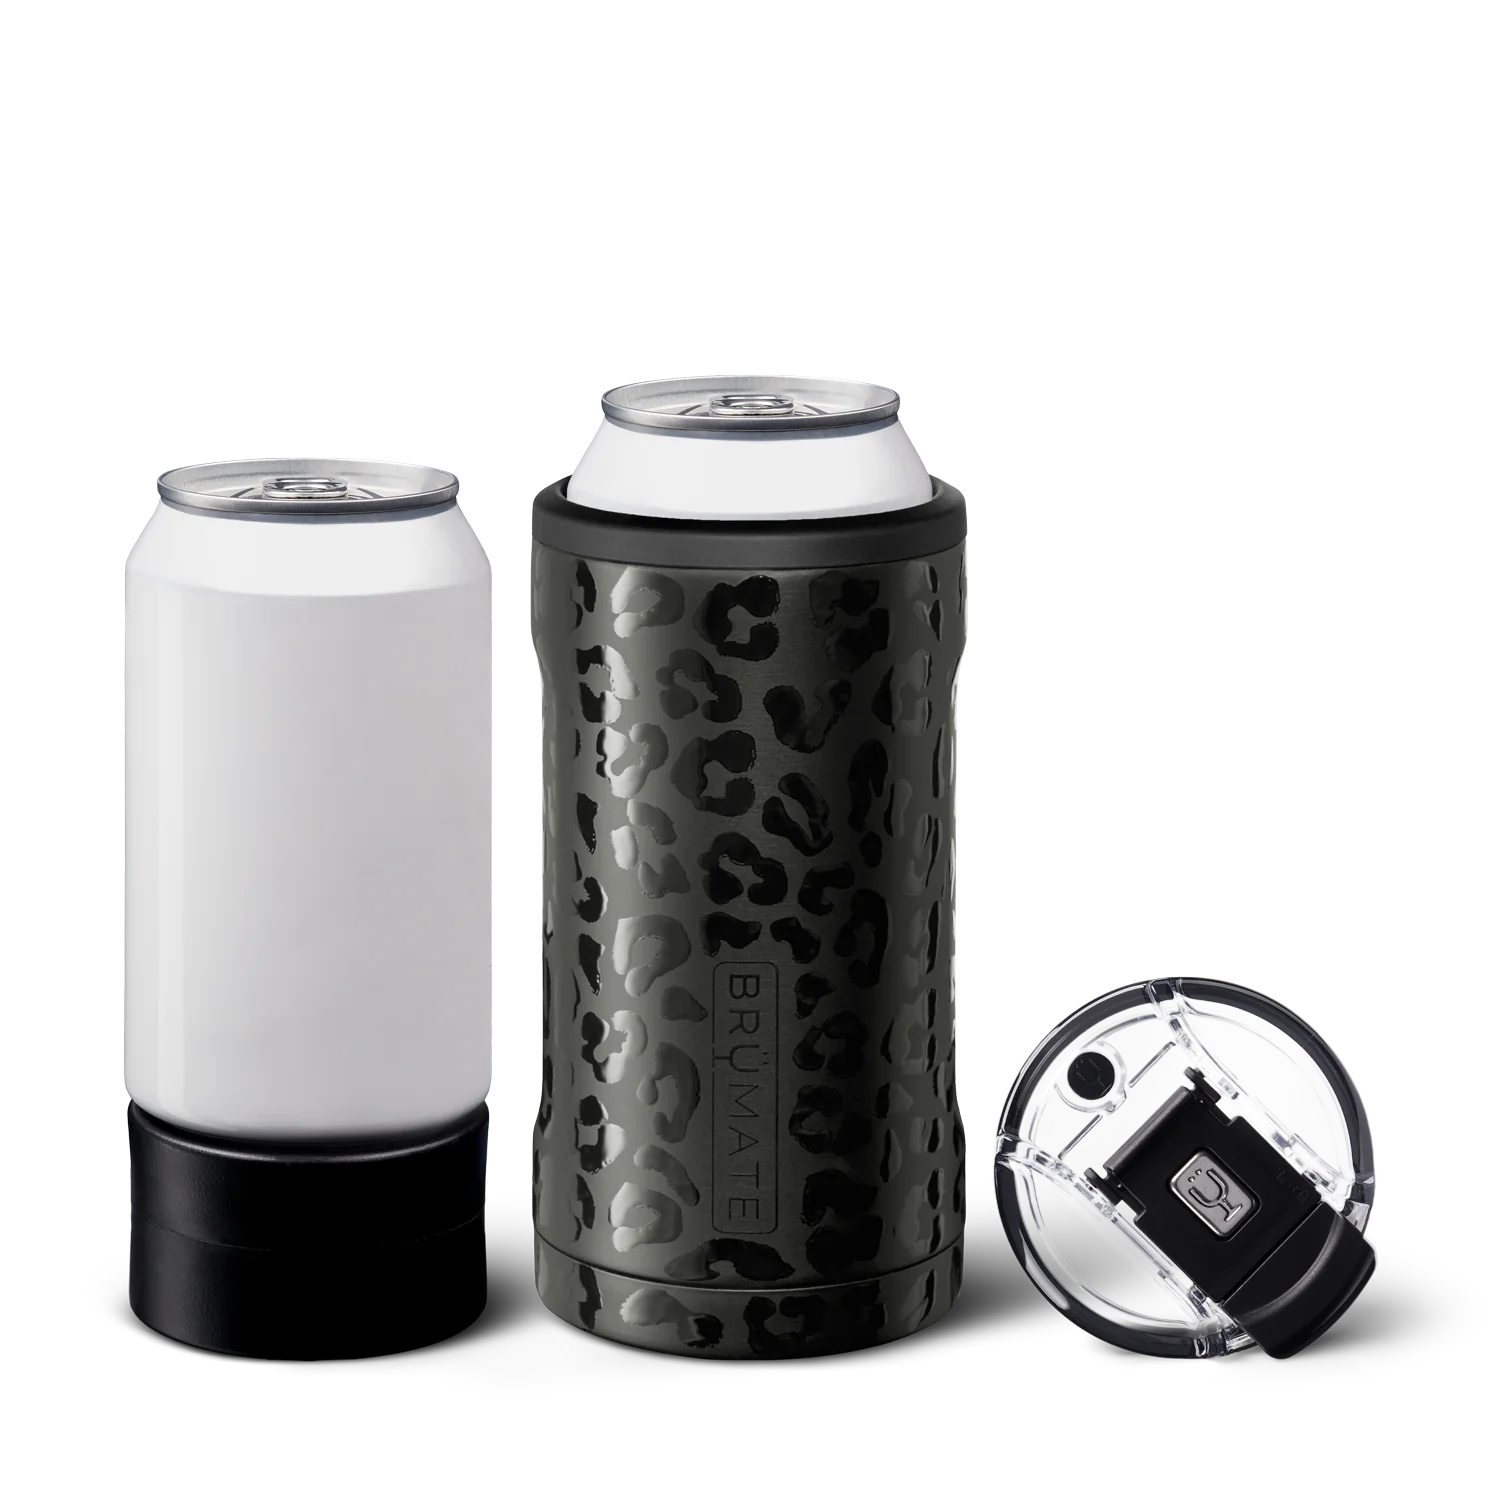 black leopard patterned cylindrical can holder, alongside a black cylindrical can stand with a colour matched lid next to it